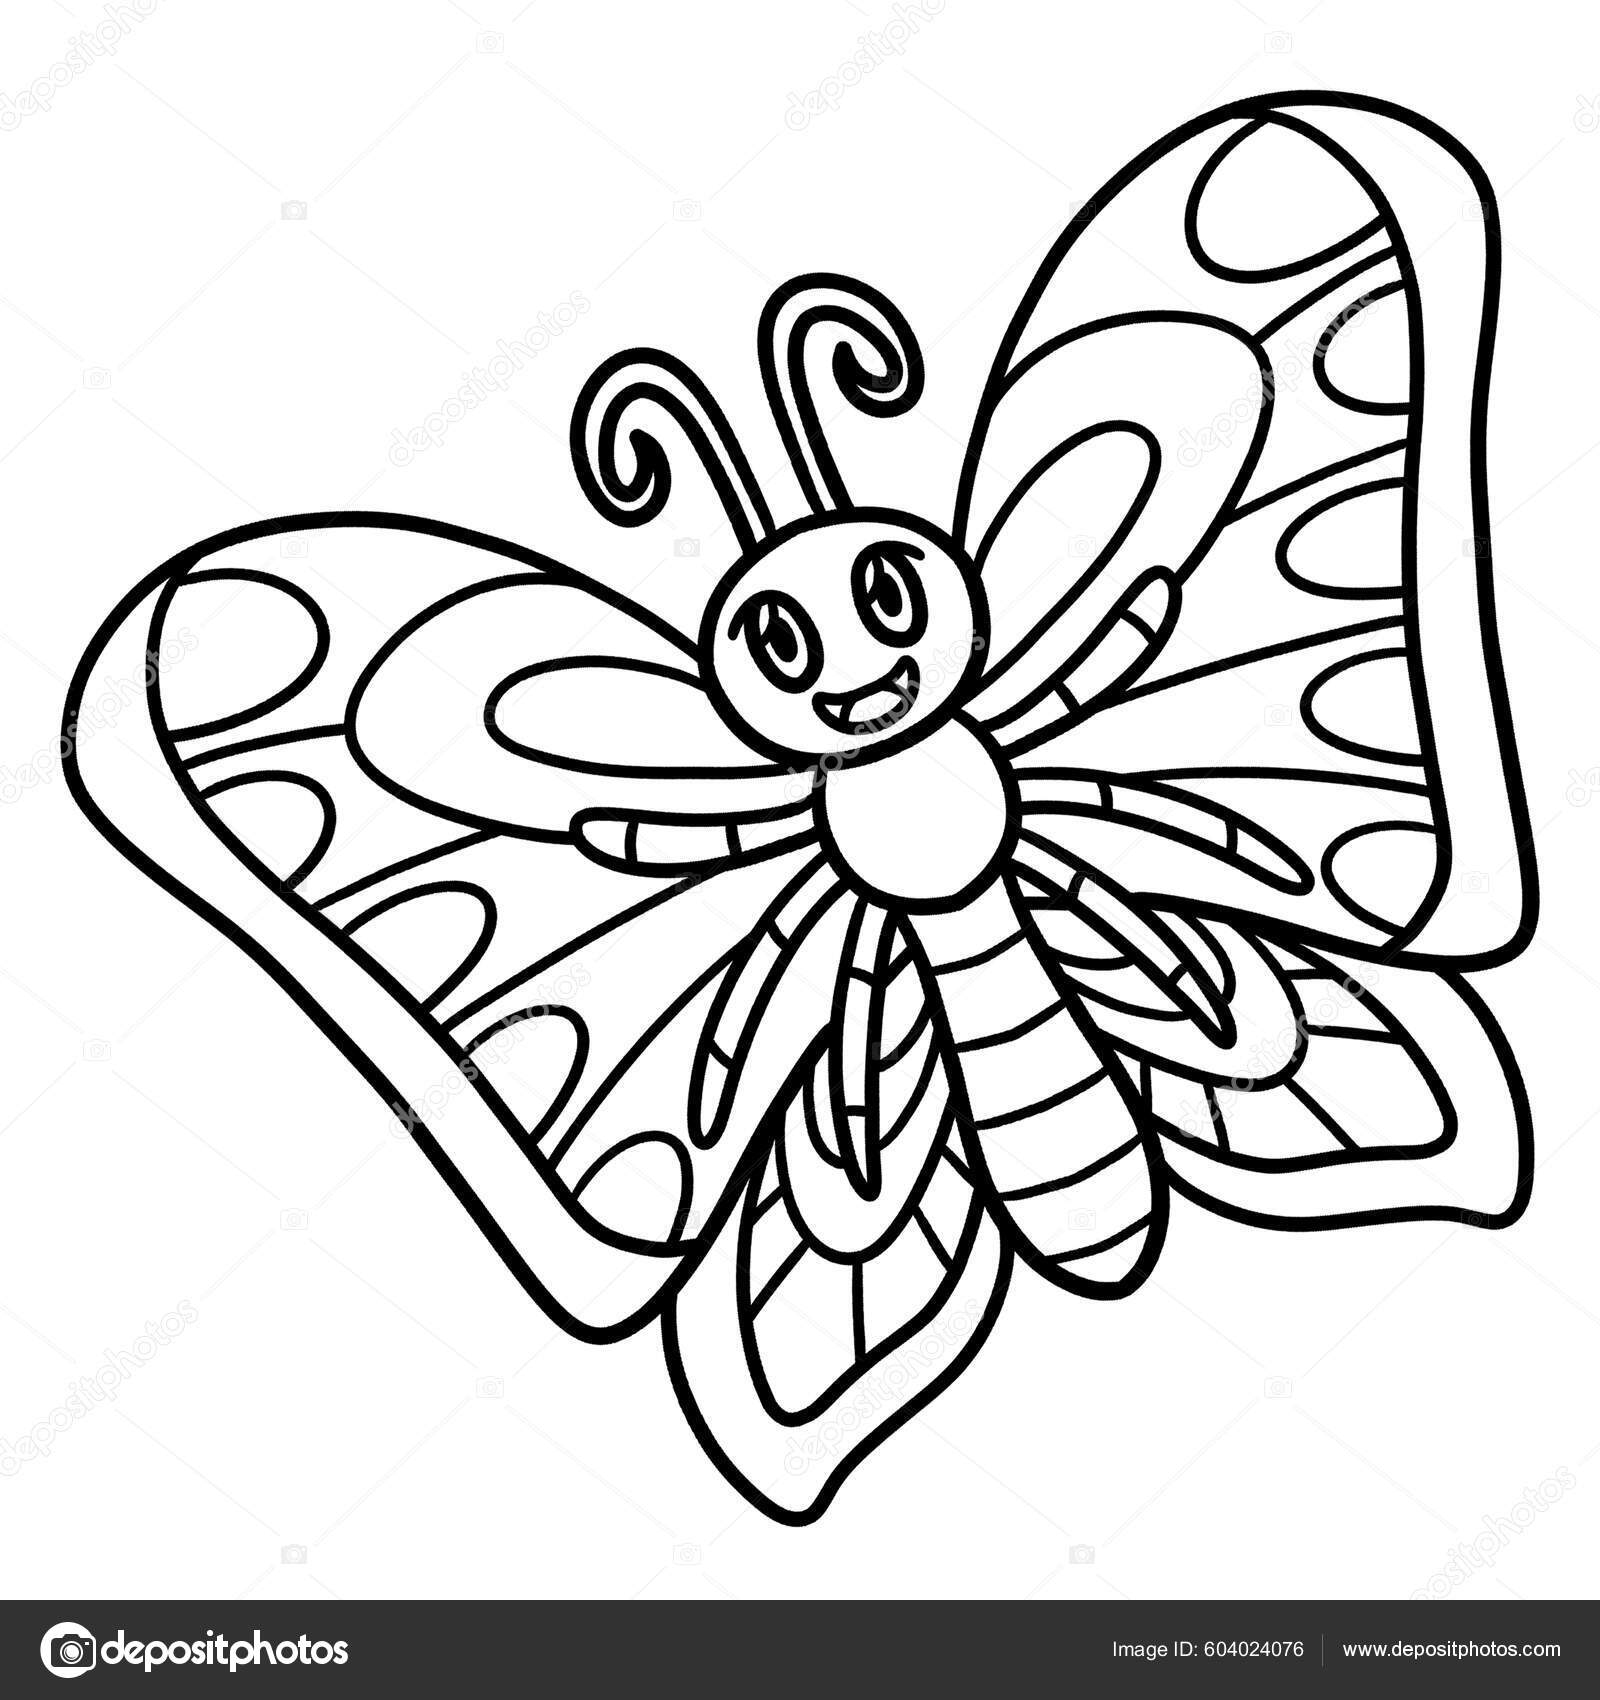 Cute funny coloring page butterfly provides hours coloring fun children stock vector by abbydesign